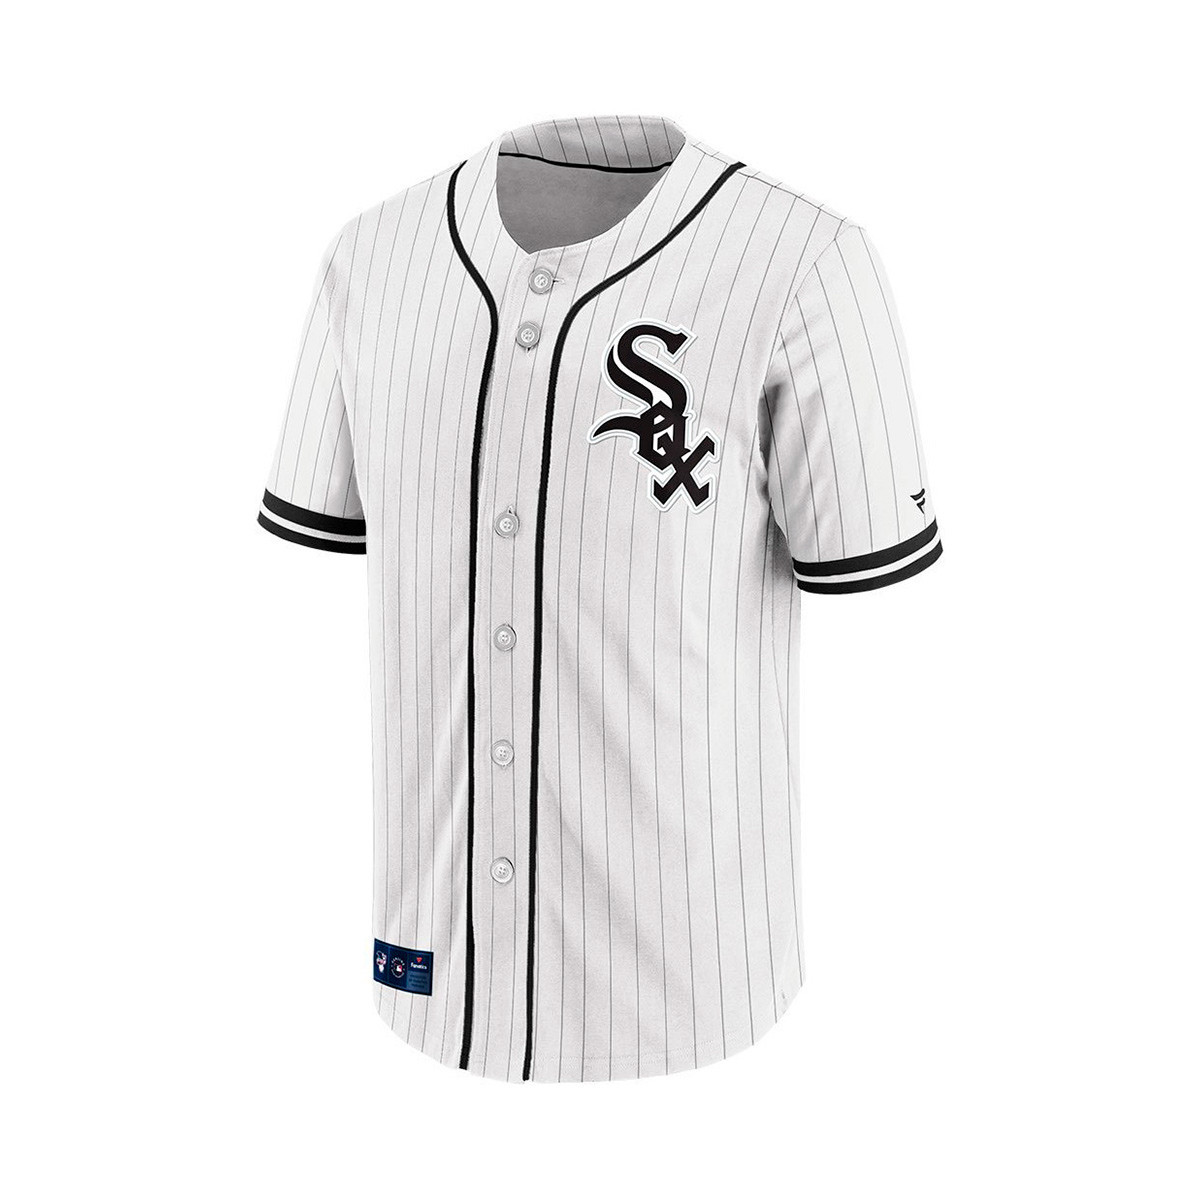 Chicago White Sox Mens Black Friday Deals, Clearance White Sox Apparel,  Discounted White Sox Gear